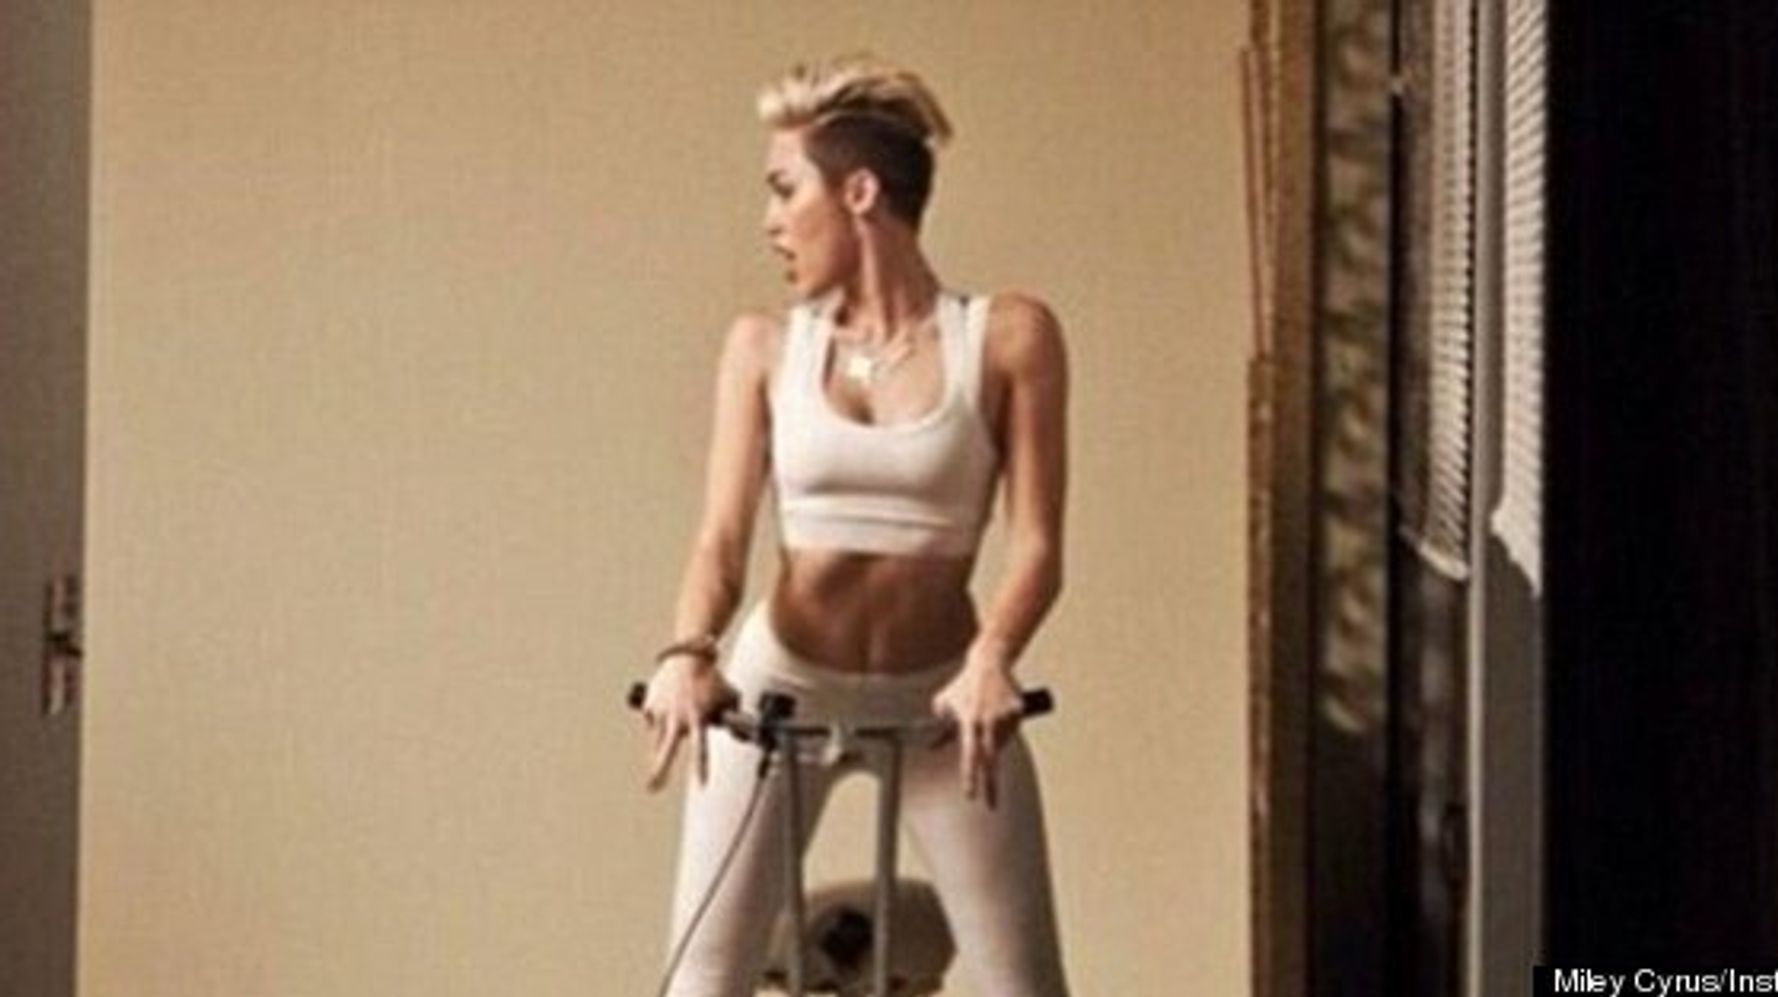 Miley Cyrus Sexy Workout Gear Instagram Pic Shows Singer Straddling